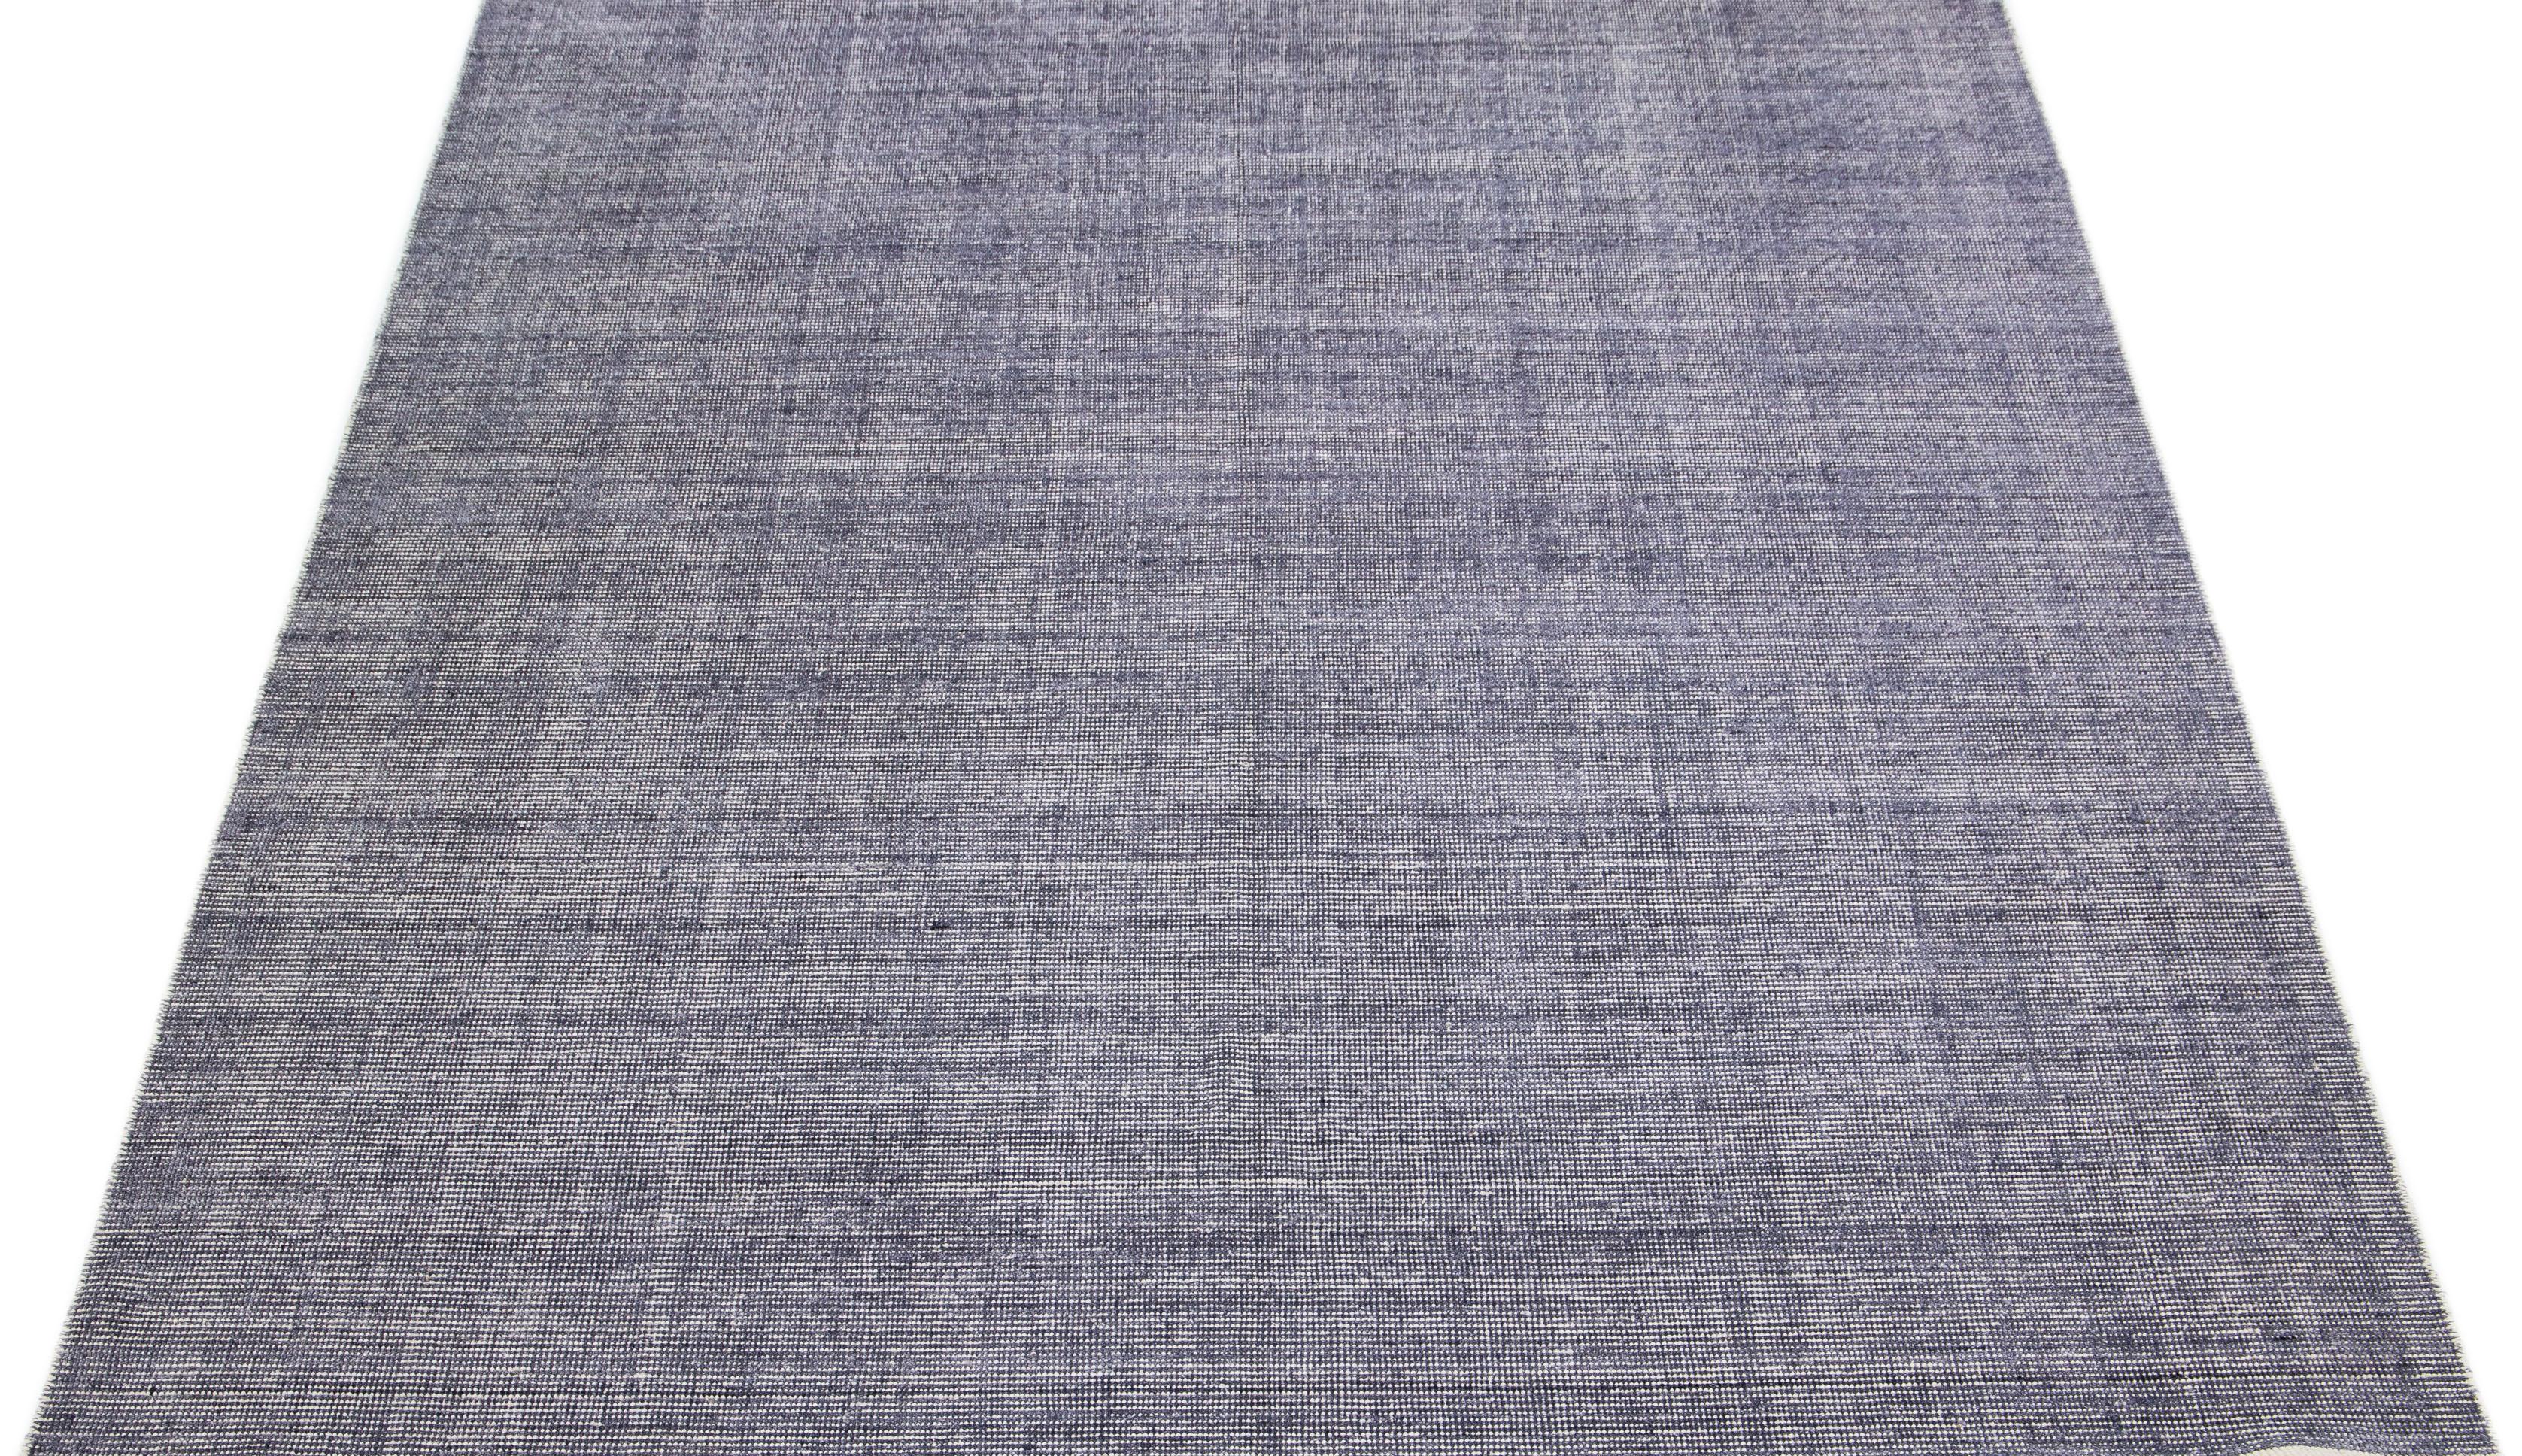 Beautiful Apadanas's handmade bamboo & silk Indian groove rug with a gray field. This groove collection rug has an all-over solid design.

This rug measures 8' x 10'.

Custom colors and sizes are available upon request.

